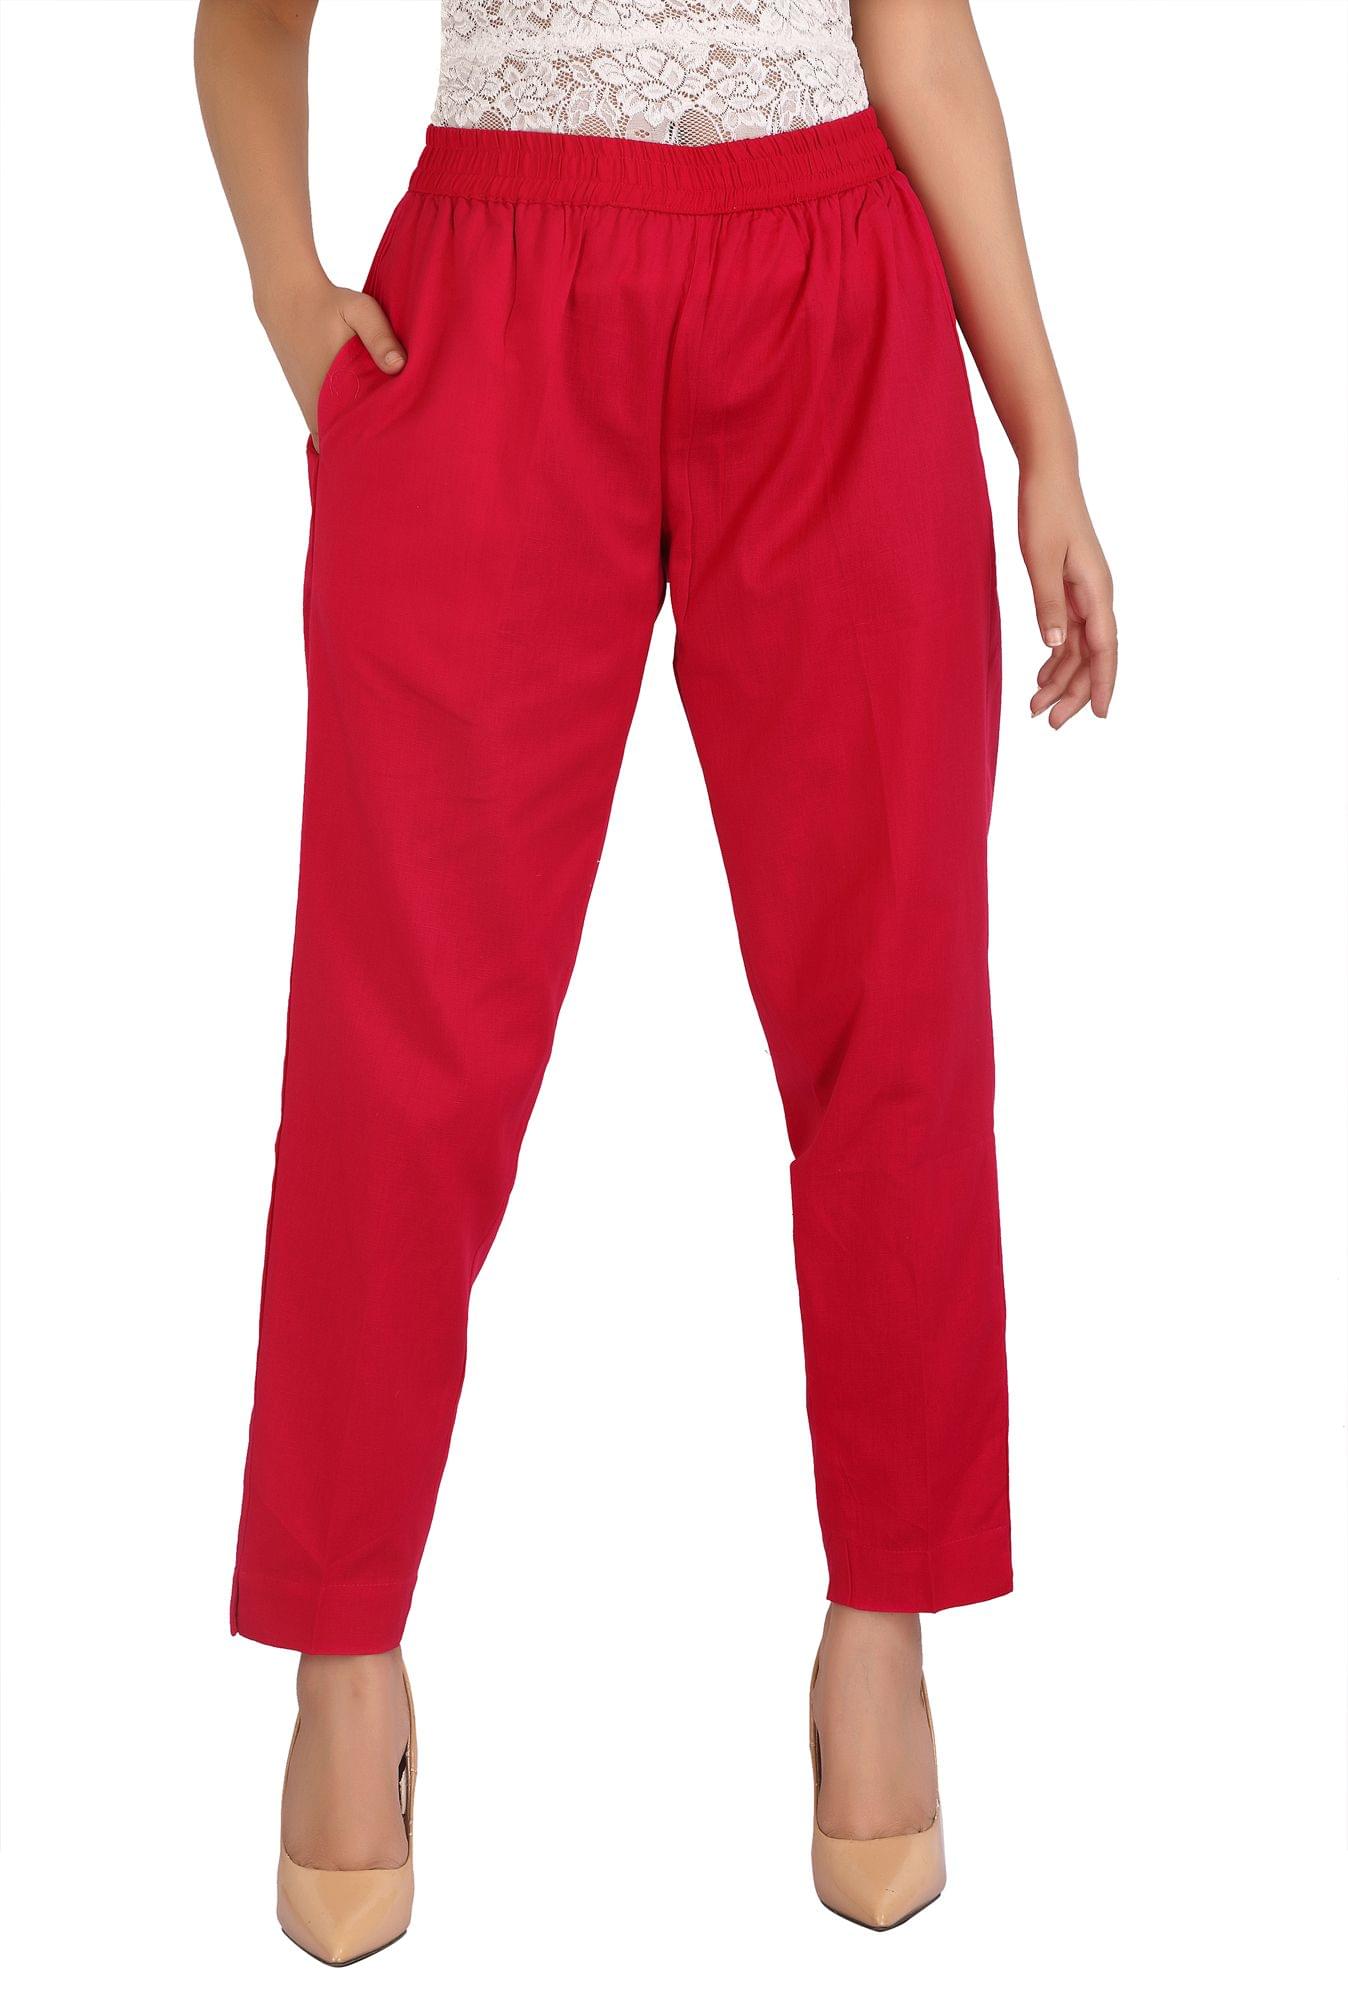 Women's Red Cotton Pant